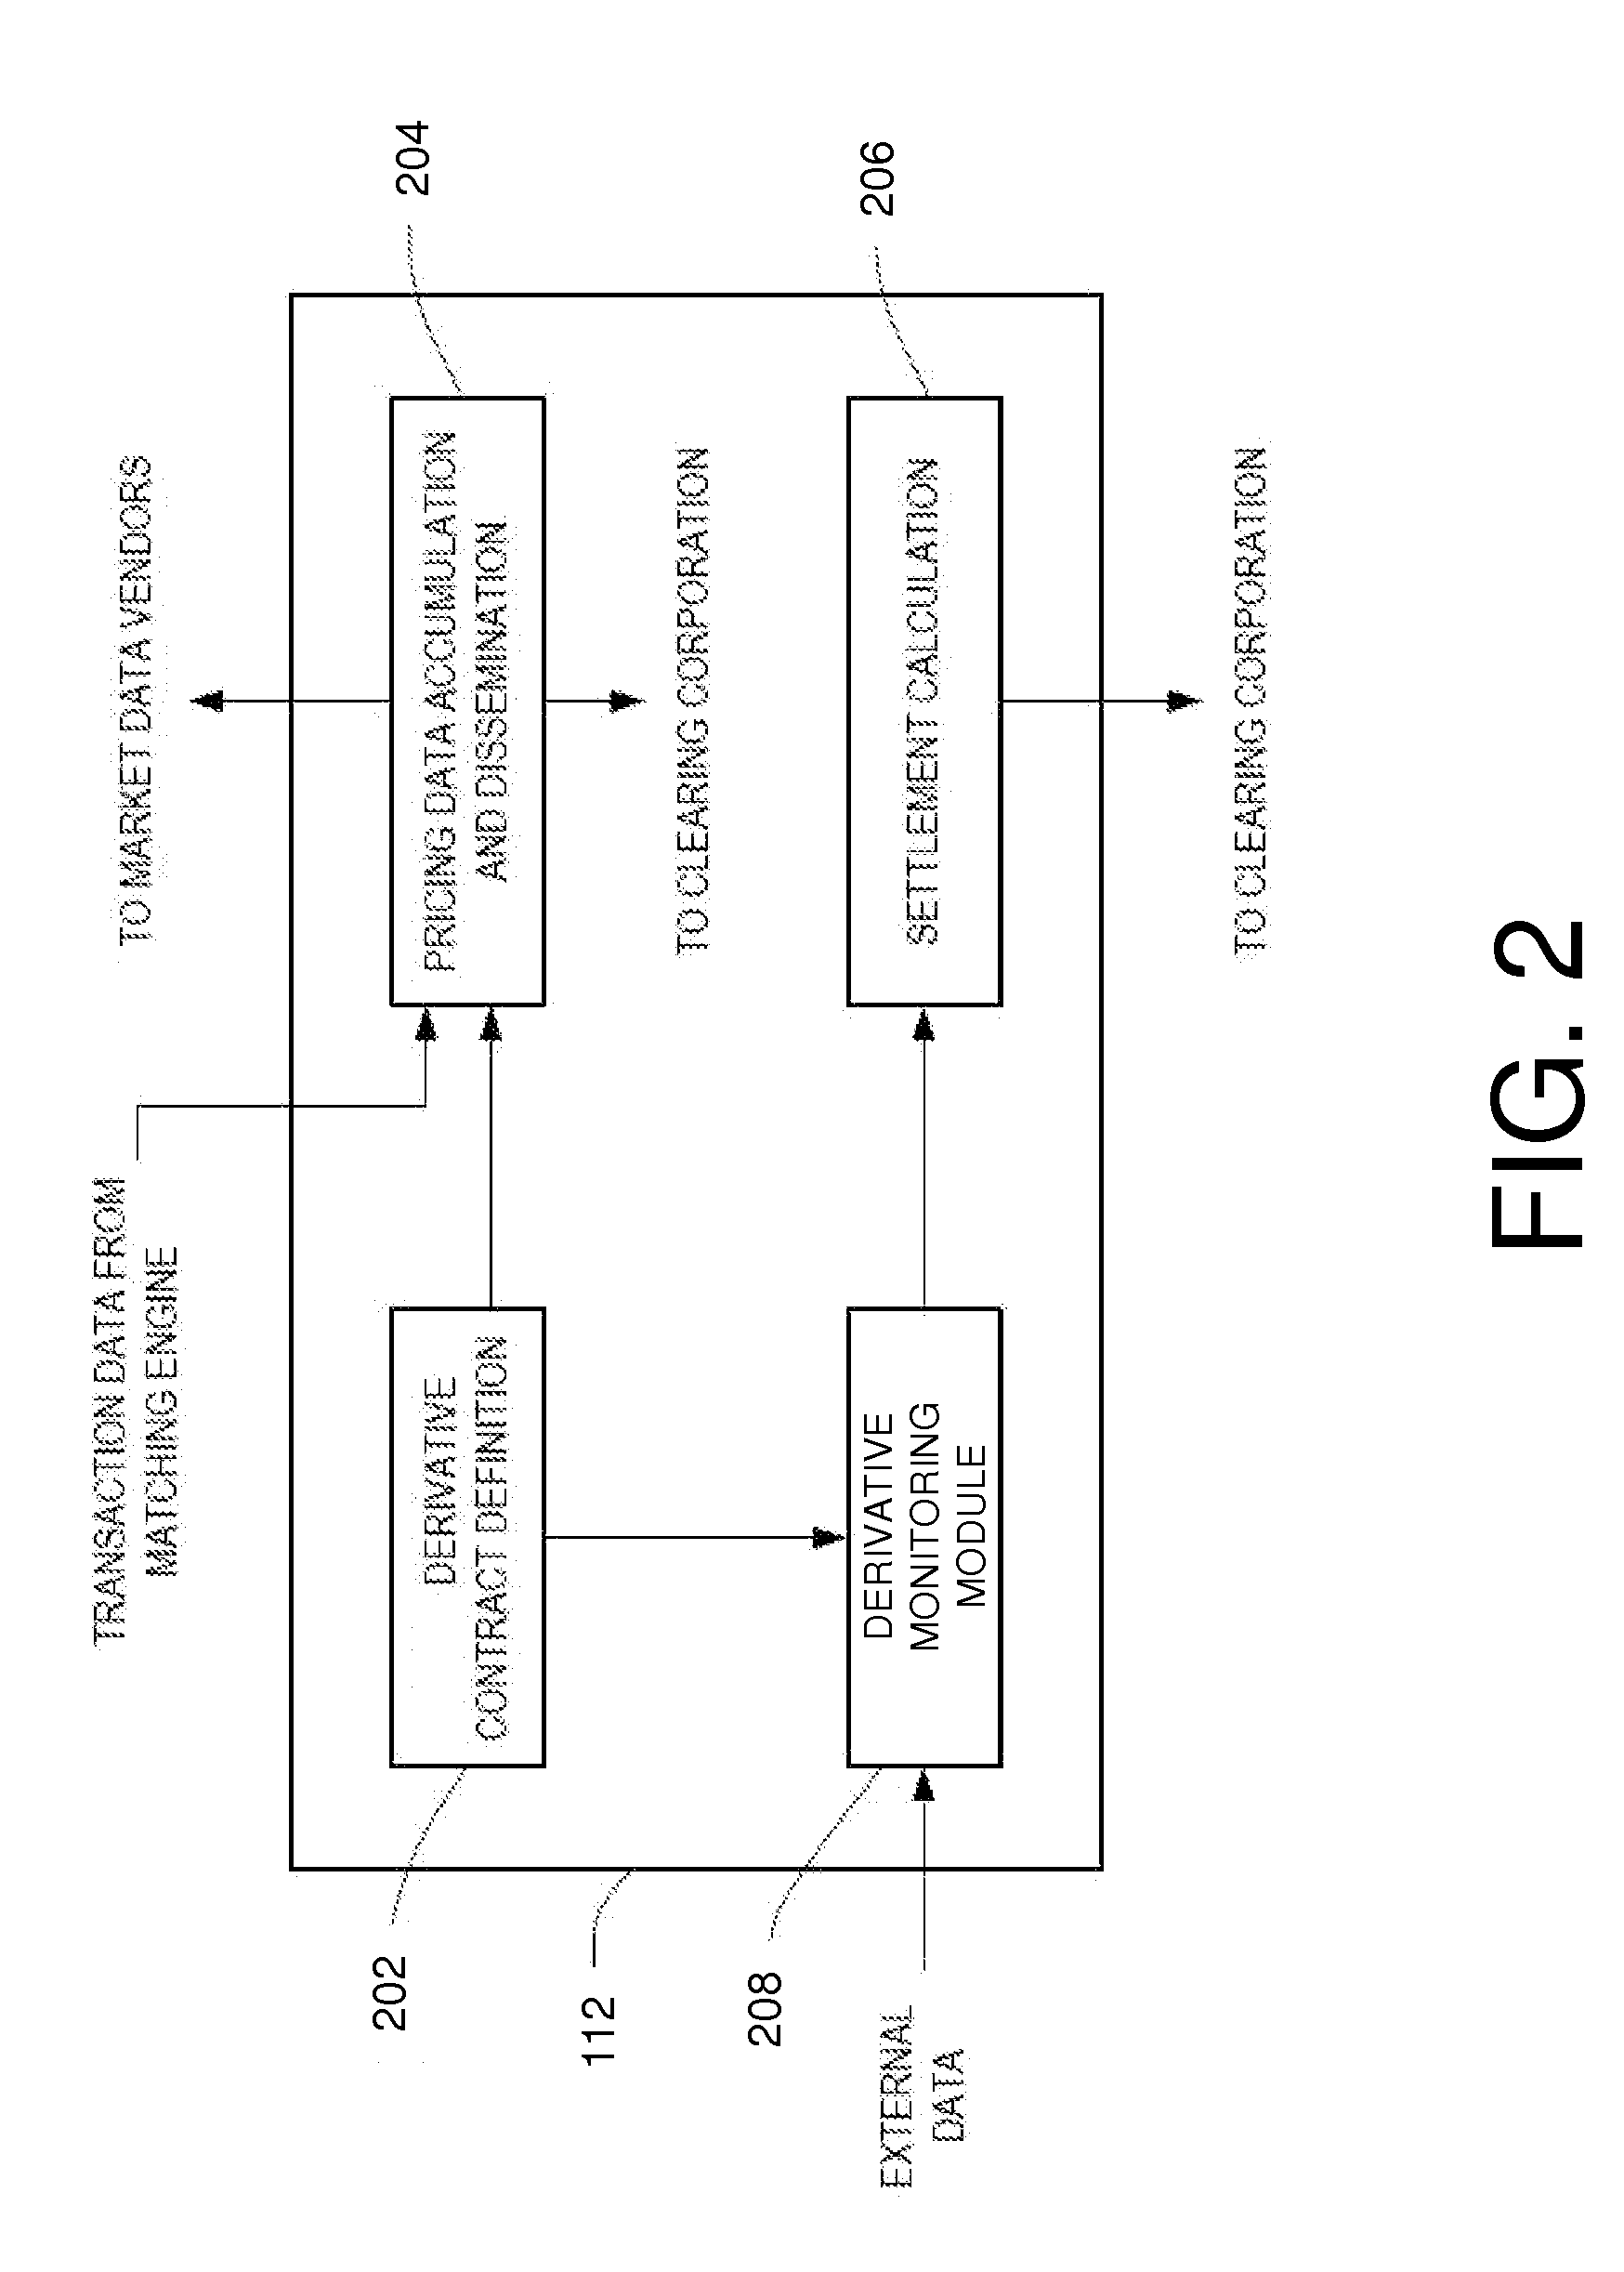 Methods and systems for creating an interest rate swap volatility index and trading derivative products based thereon